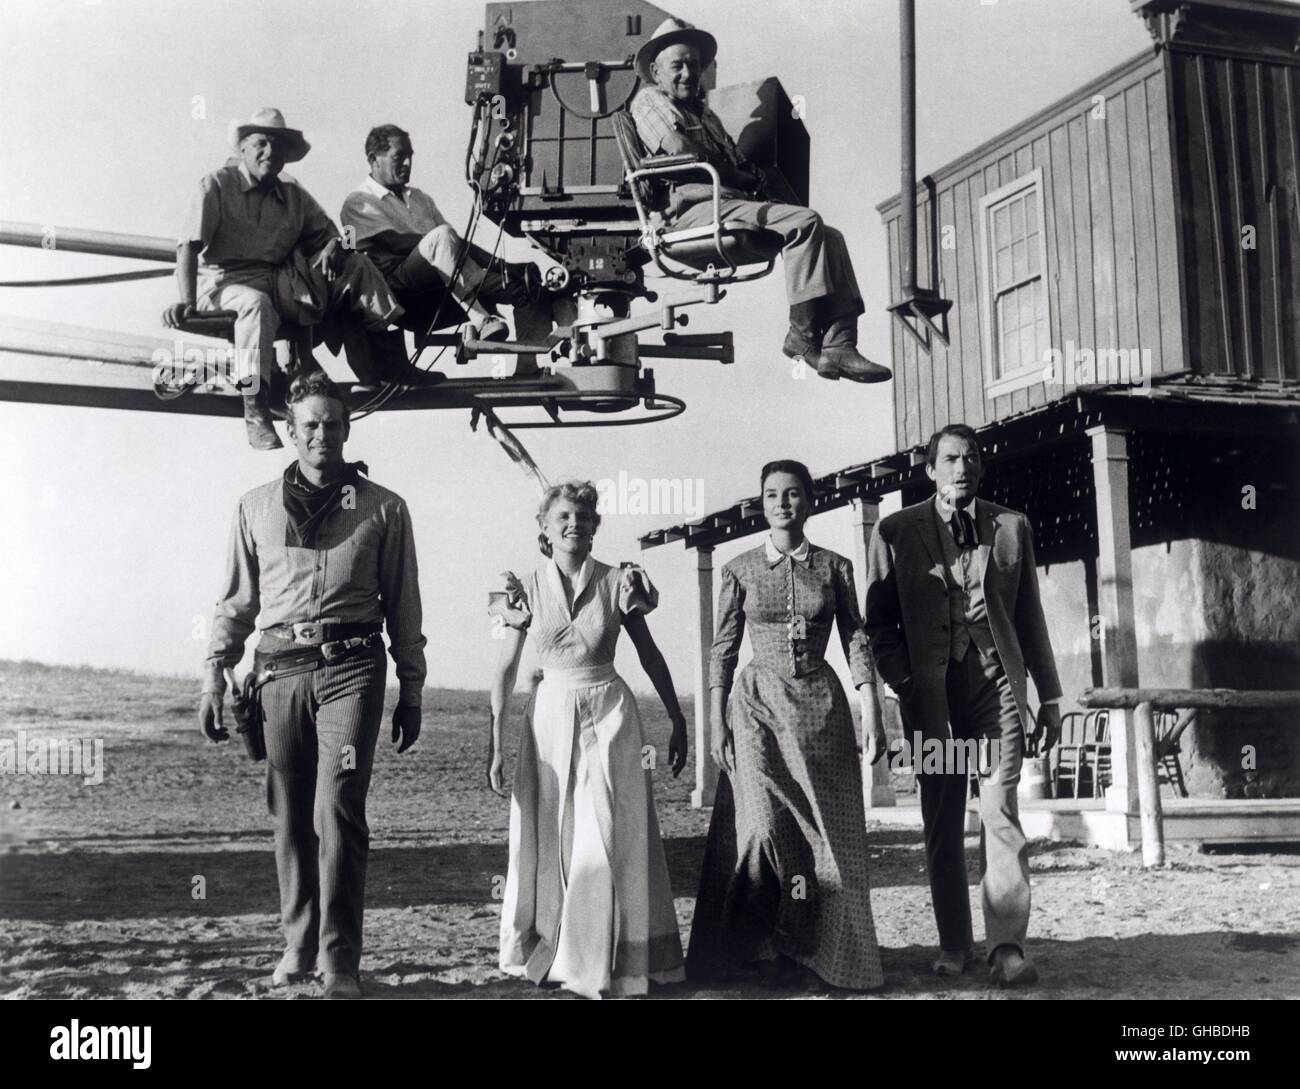 WEITES LAND The Big Country USA 1958 William Wyler CHARLTON HESTON, CARROLL BAKER, JEAN SIMMONS, GREGORY PECK and on the camera crane: Director WILLIAM WYLER Regie: William Wyler aka. The Big Country Stock Photo